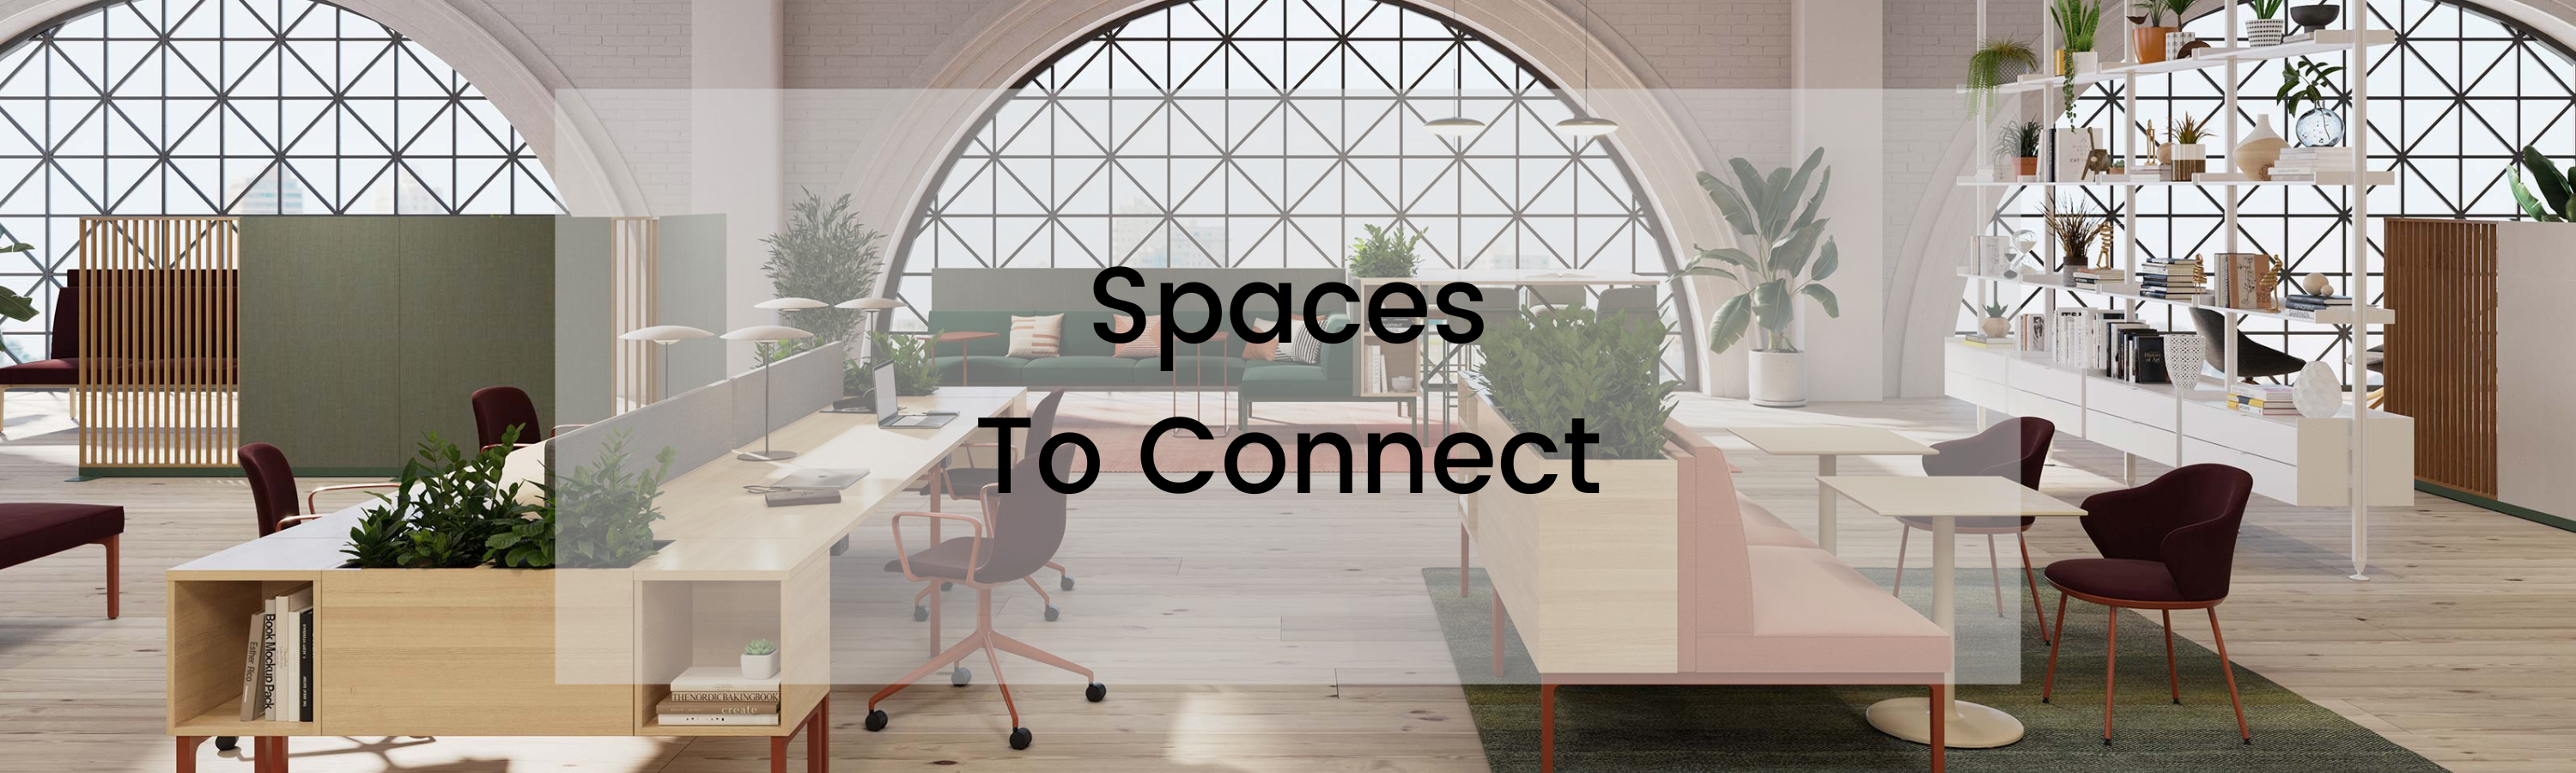 Newer Interiors Spaces Banner (2)